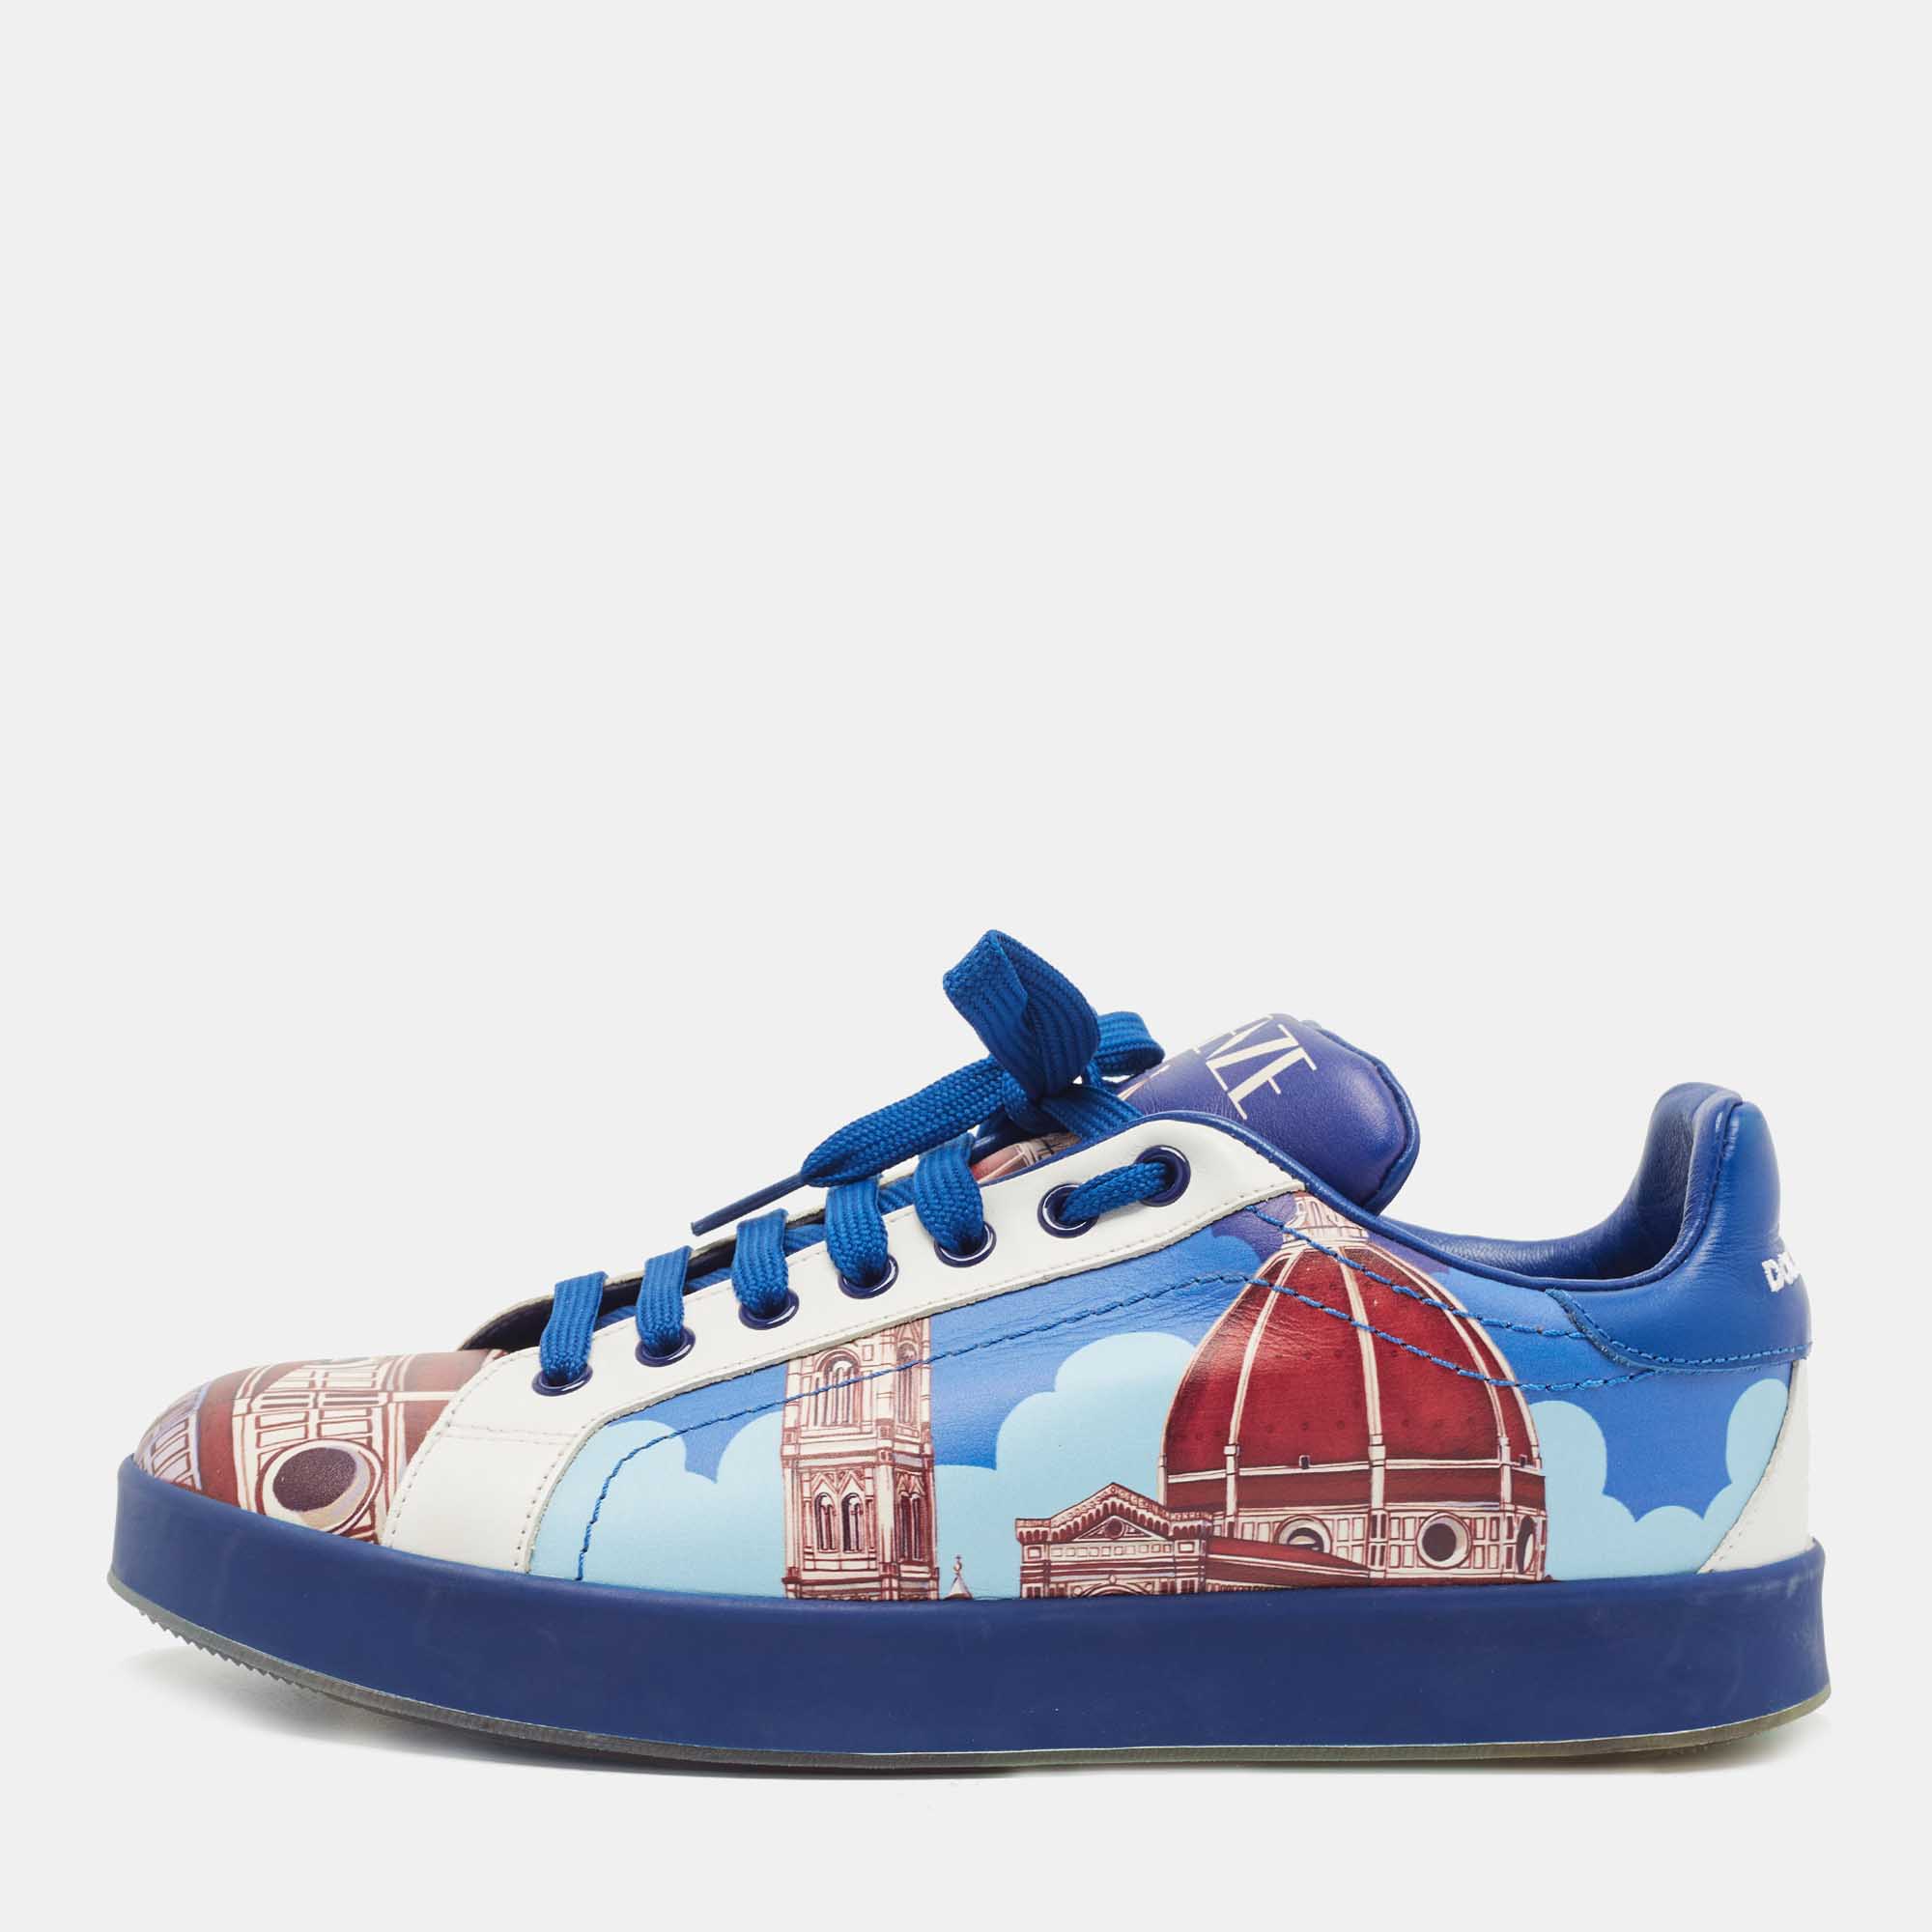 

Dolce & Gabbana Tricolor Printed Leather Low Top Sneakers Size, Blue